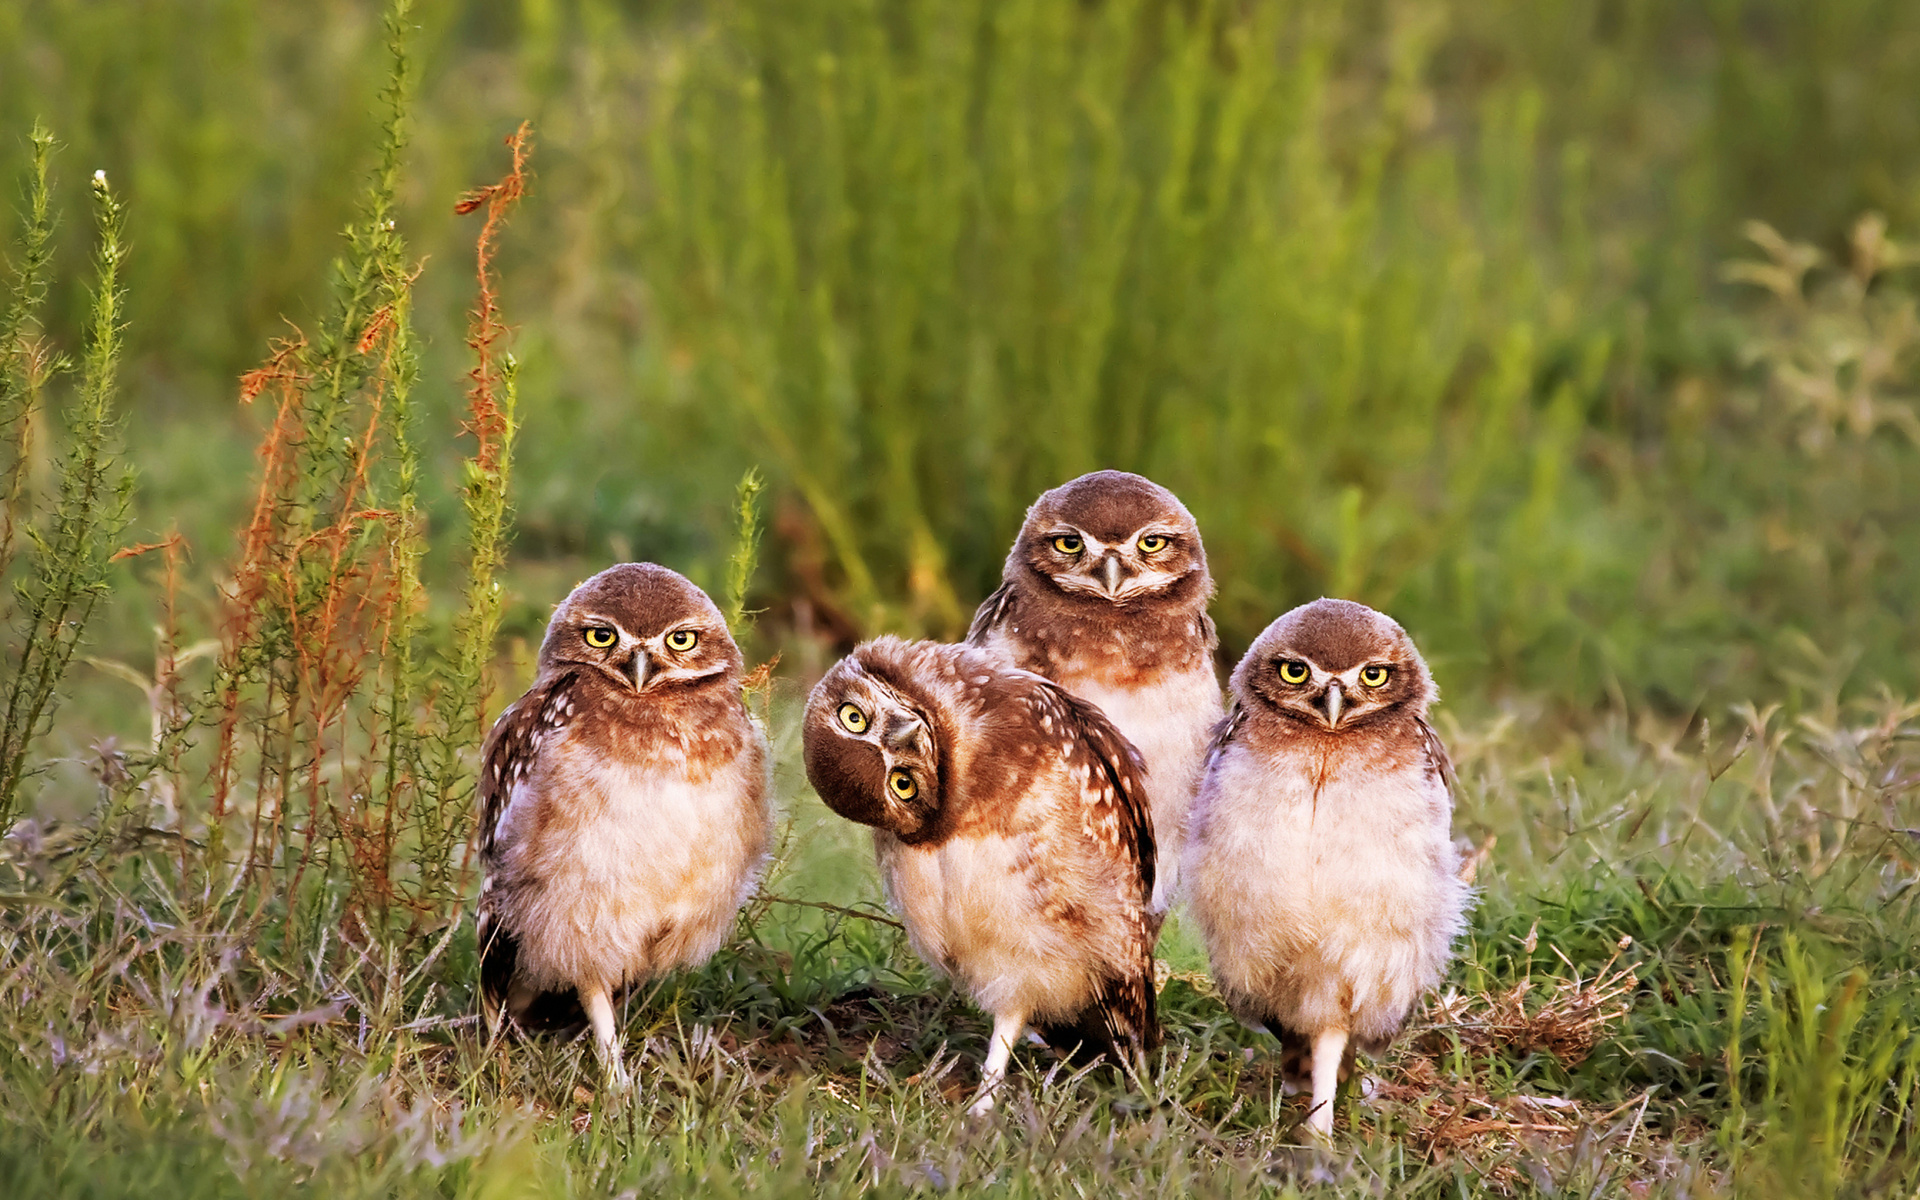 Das Morning with owls Wallpaper 1920x1200